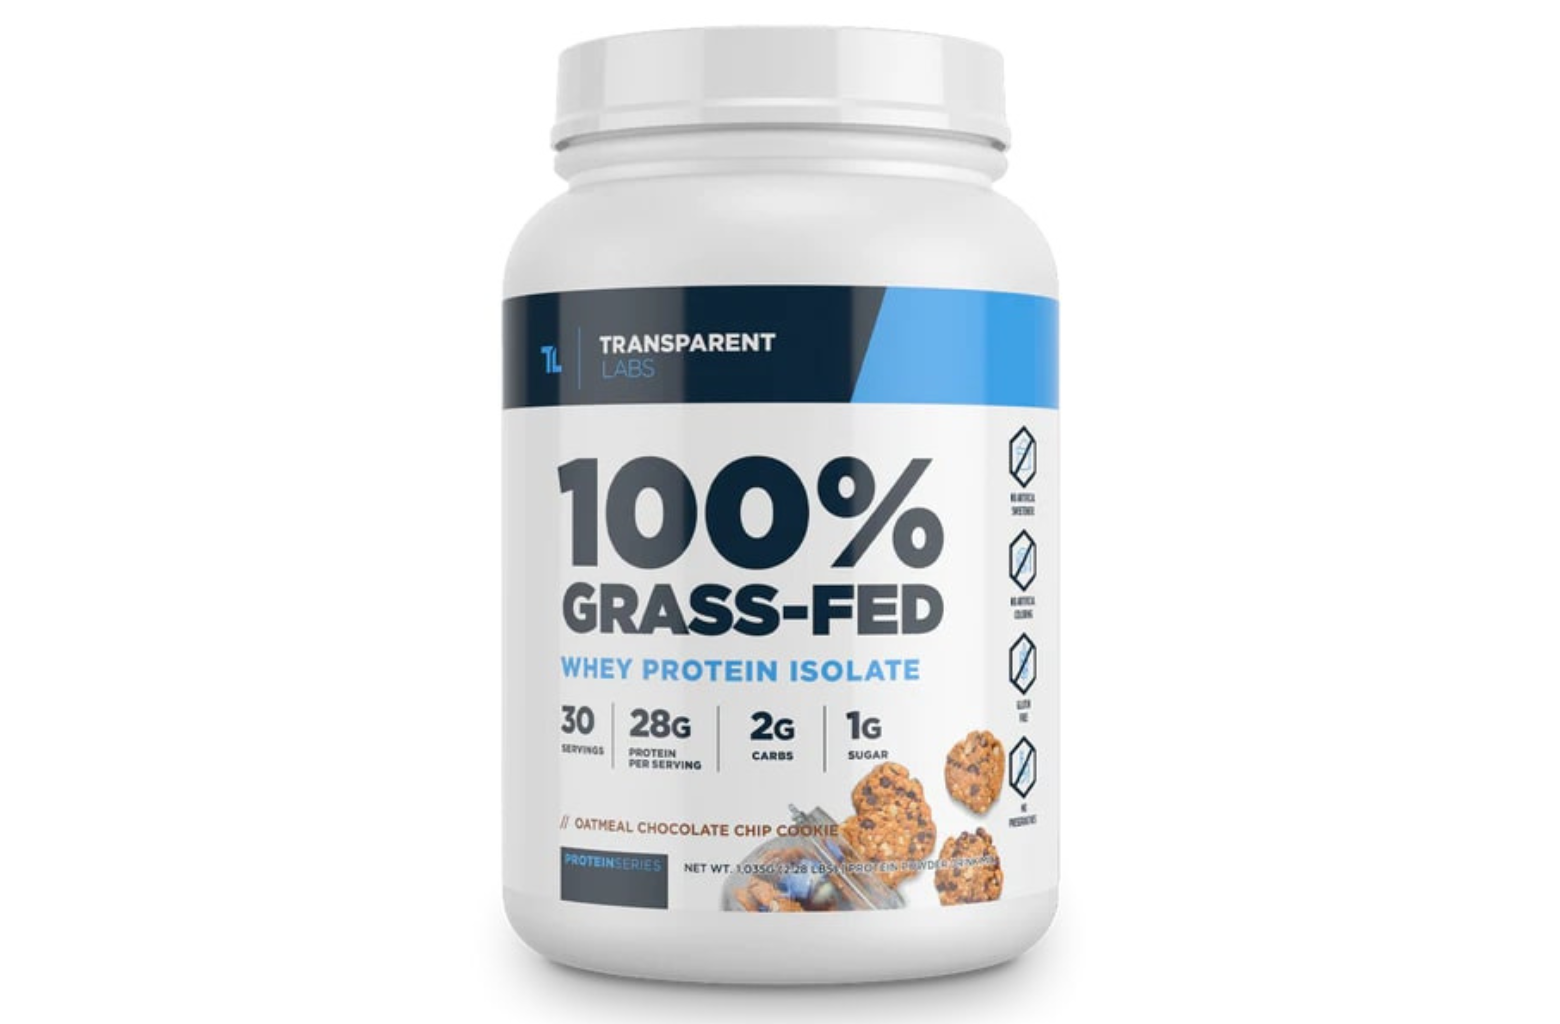 https://images.saymedia-content.com/.image/cs_srgb/MTk1MDcxMDc1NDgxMzY0MTk0/transparent-labs-whey-protein-isolate_product.png